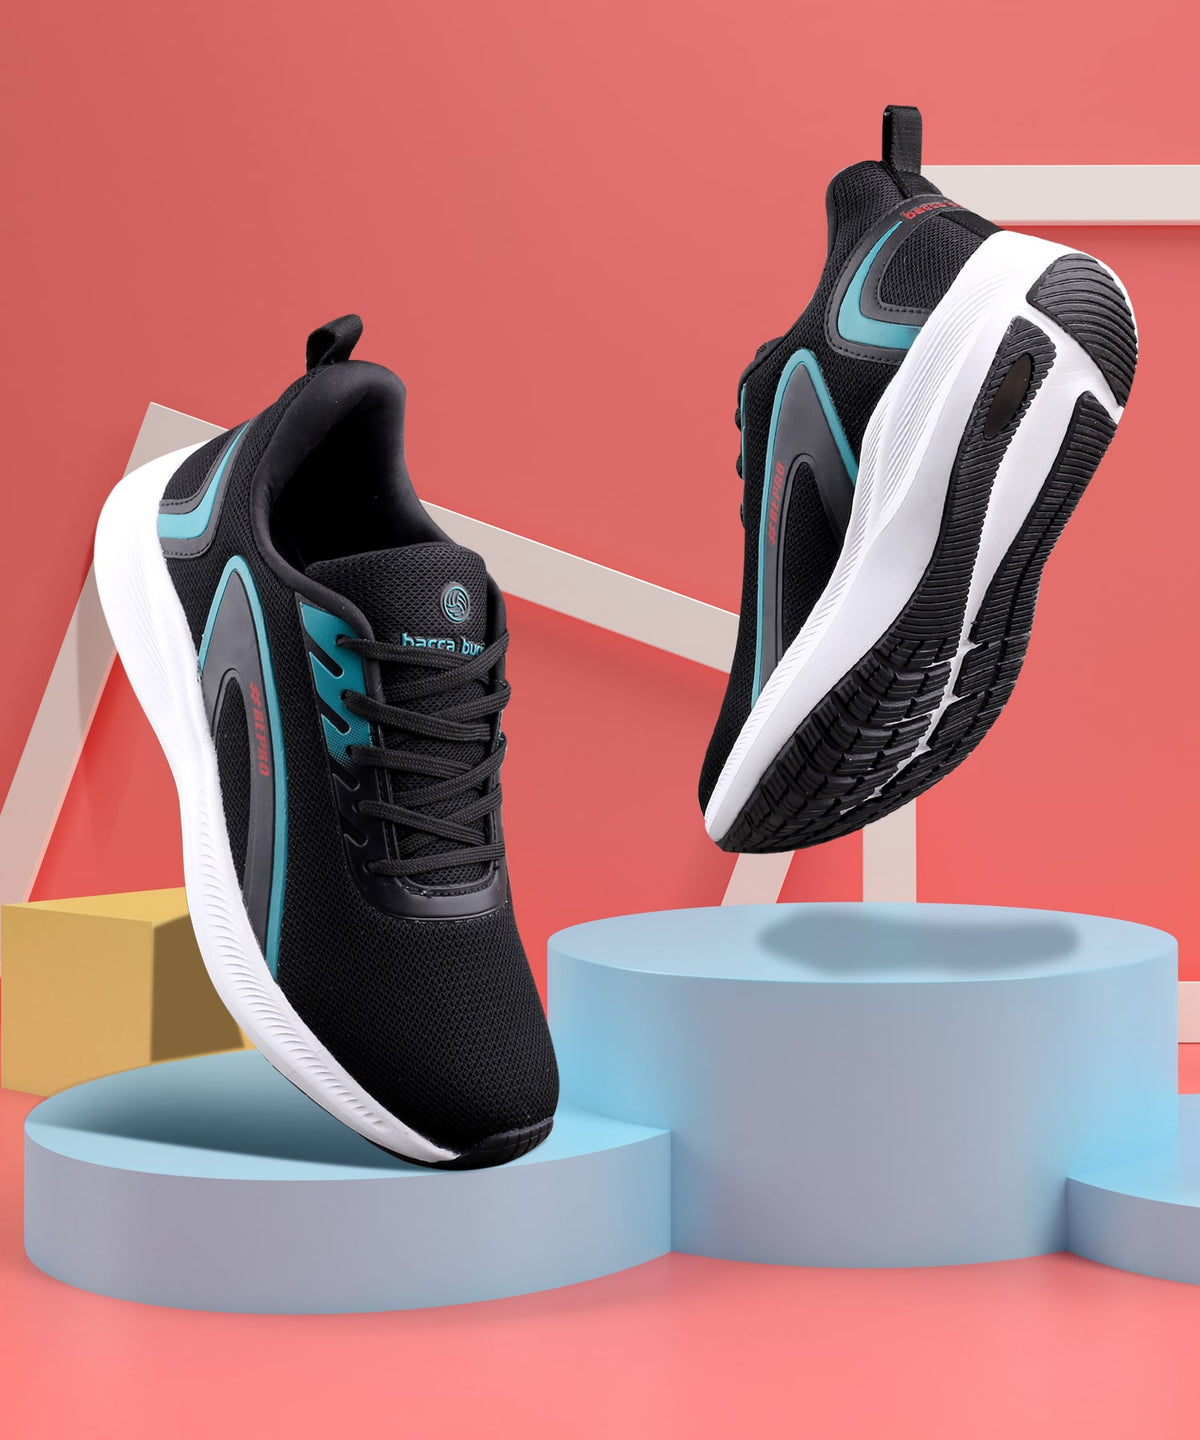 The 4 best trail running shoes of 2023 for any terrain | CNN Underscored